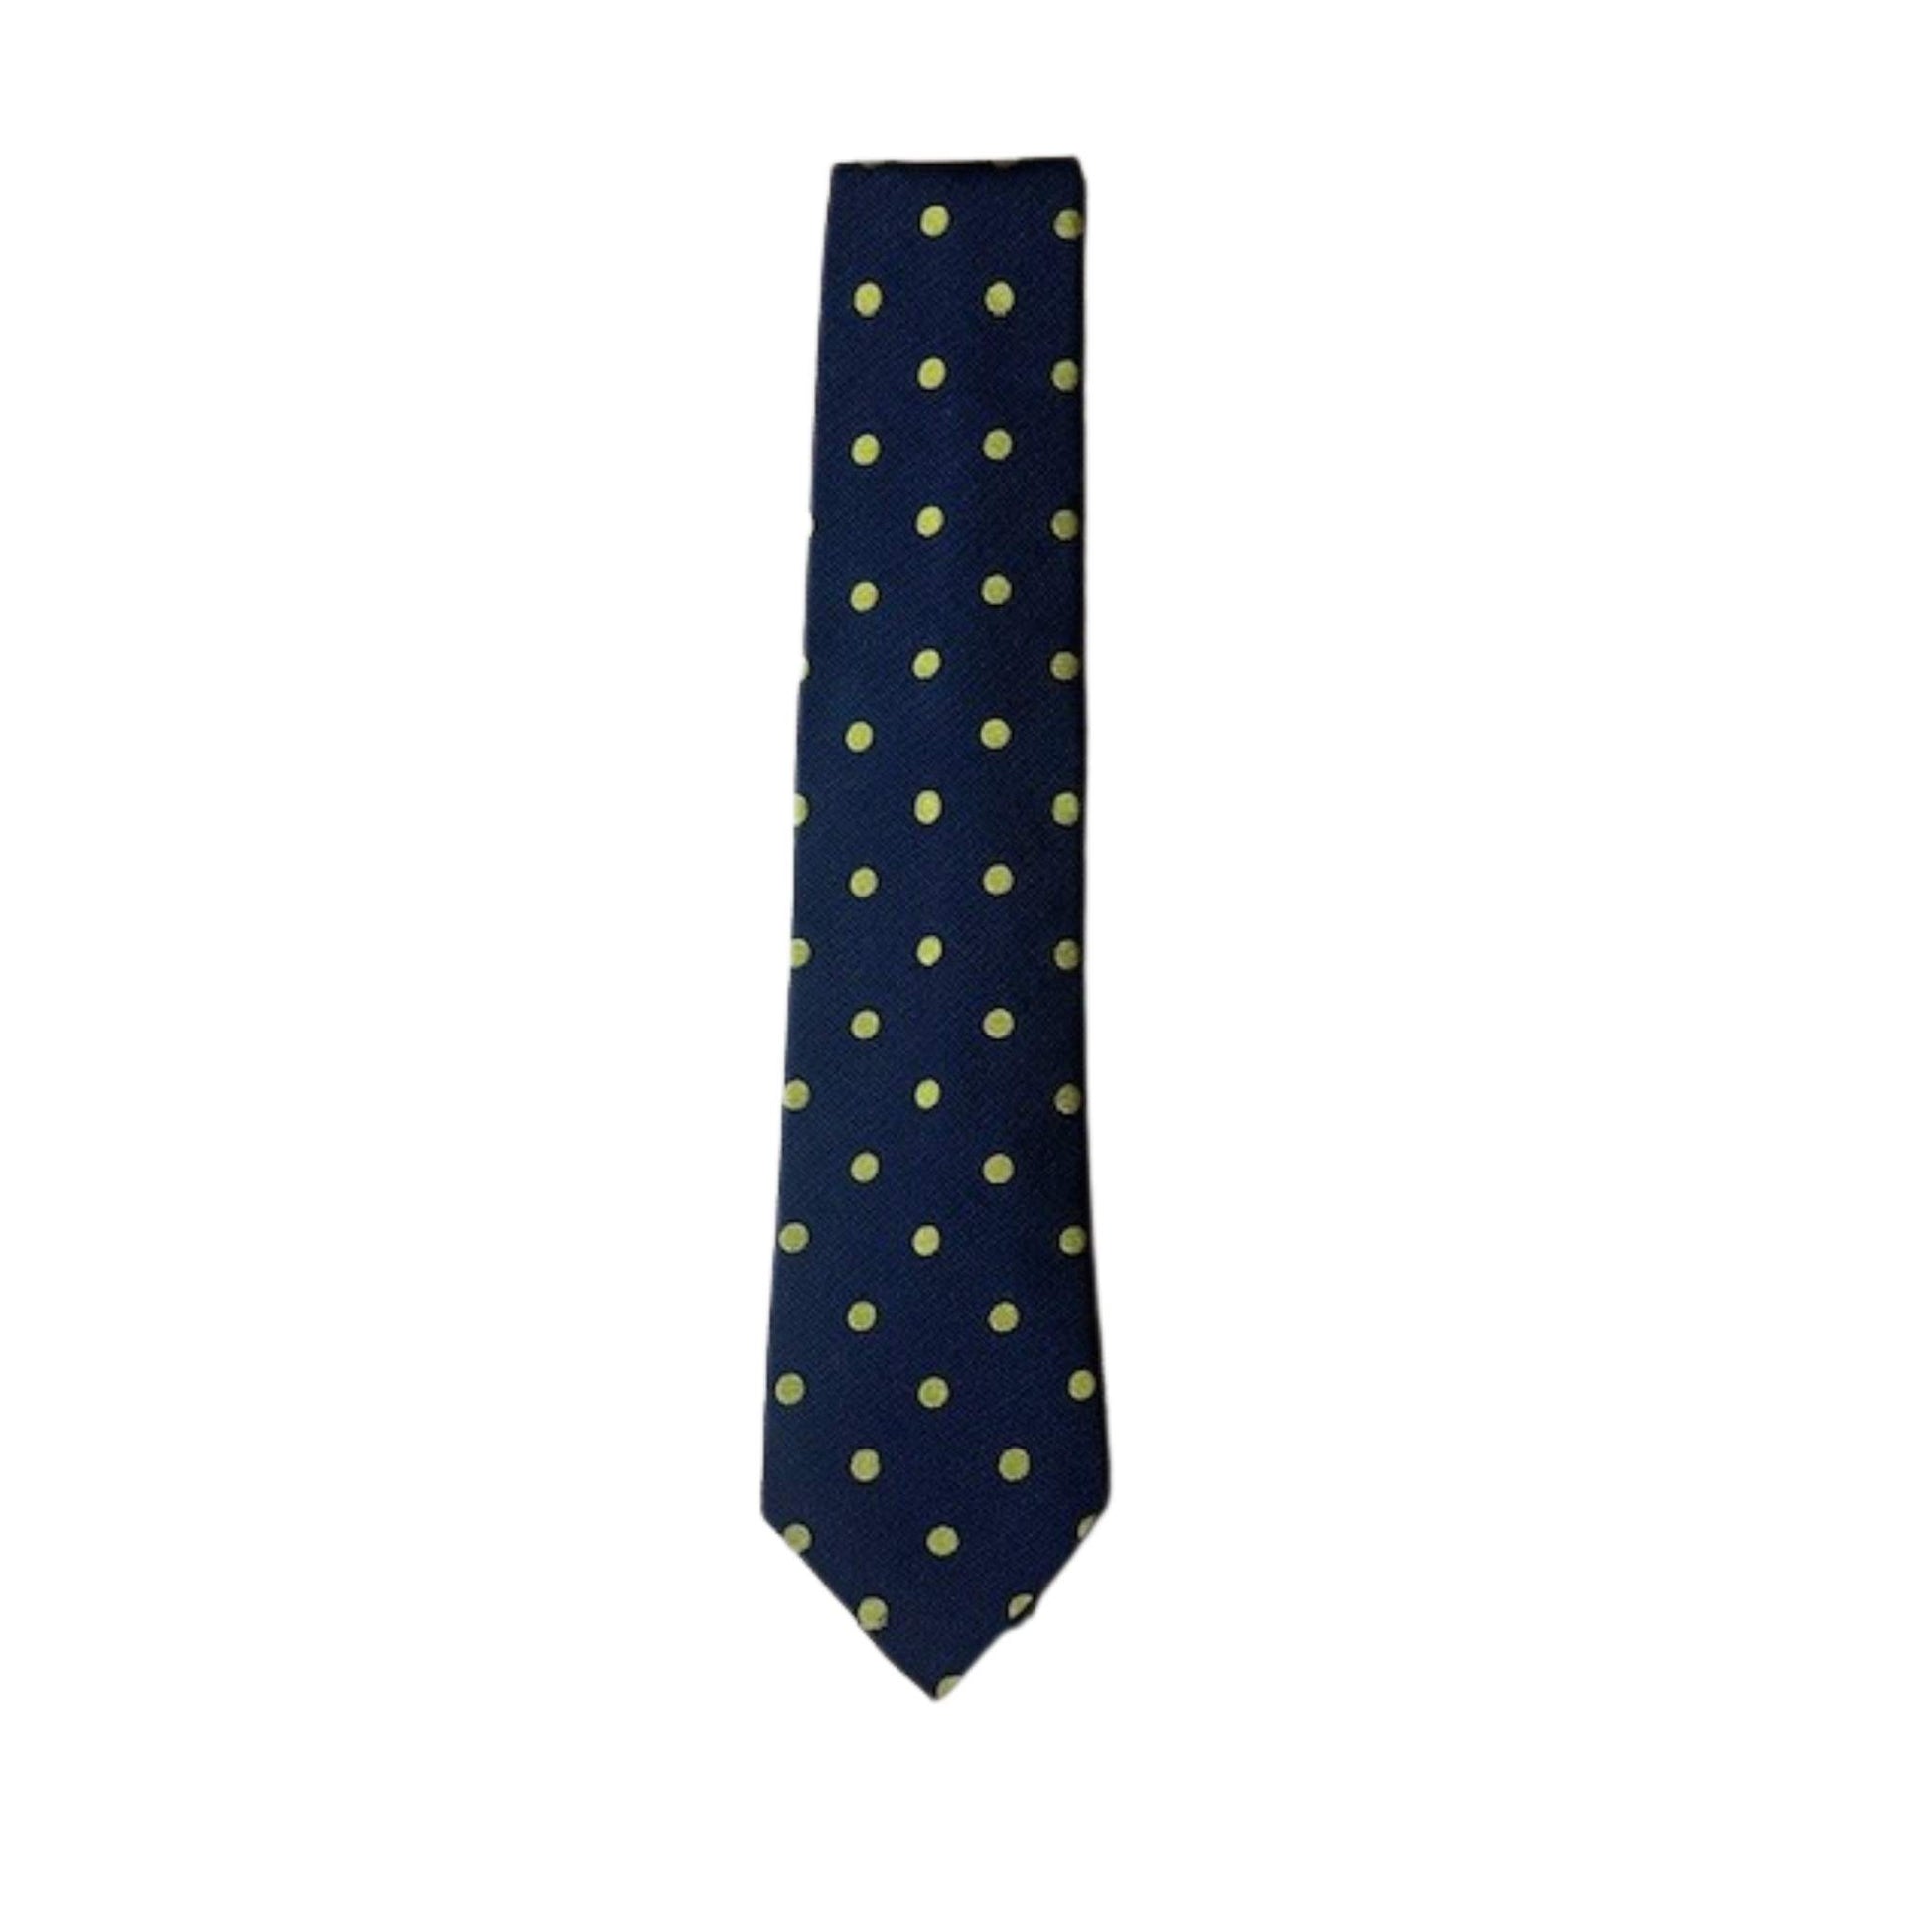 Rhodes Wood Navy and Yellow spot tie